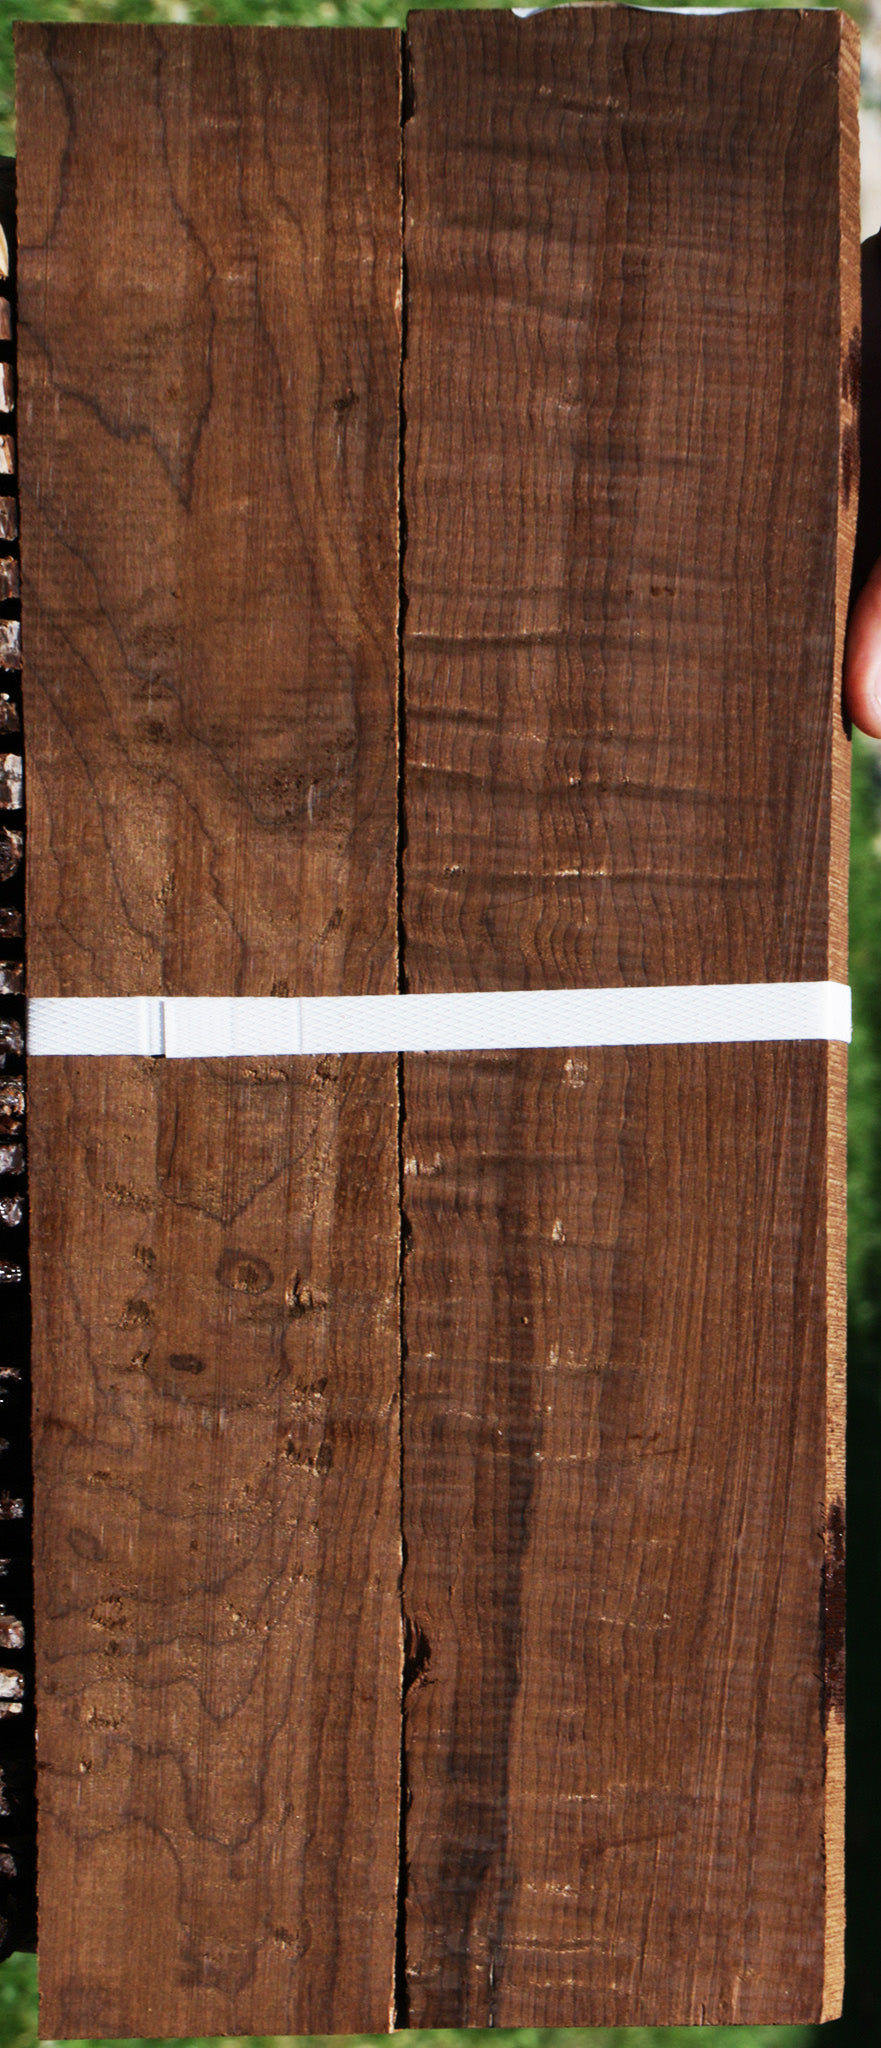 Extra Fancy Caramelized Birch Lumber 2 Pack